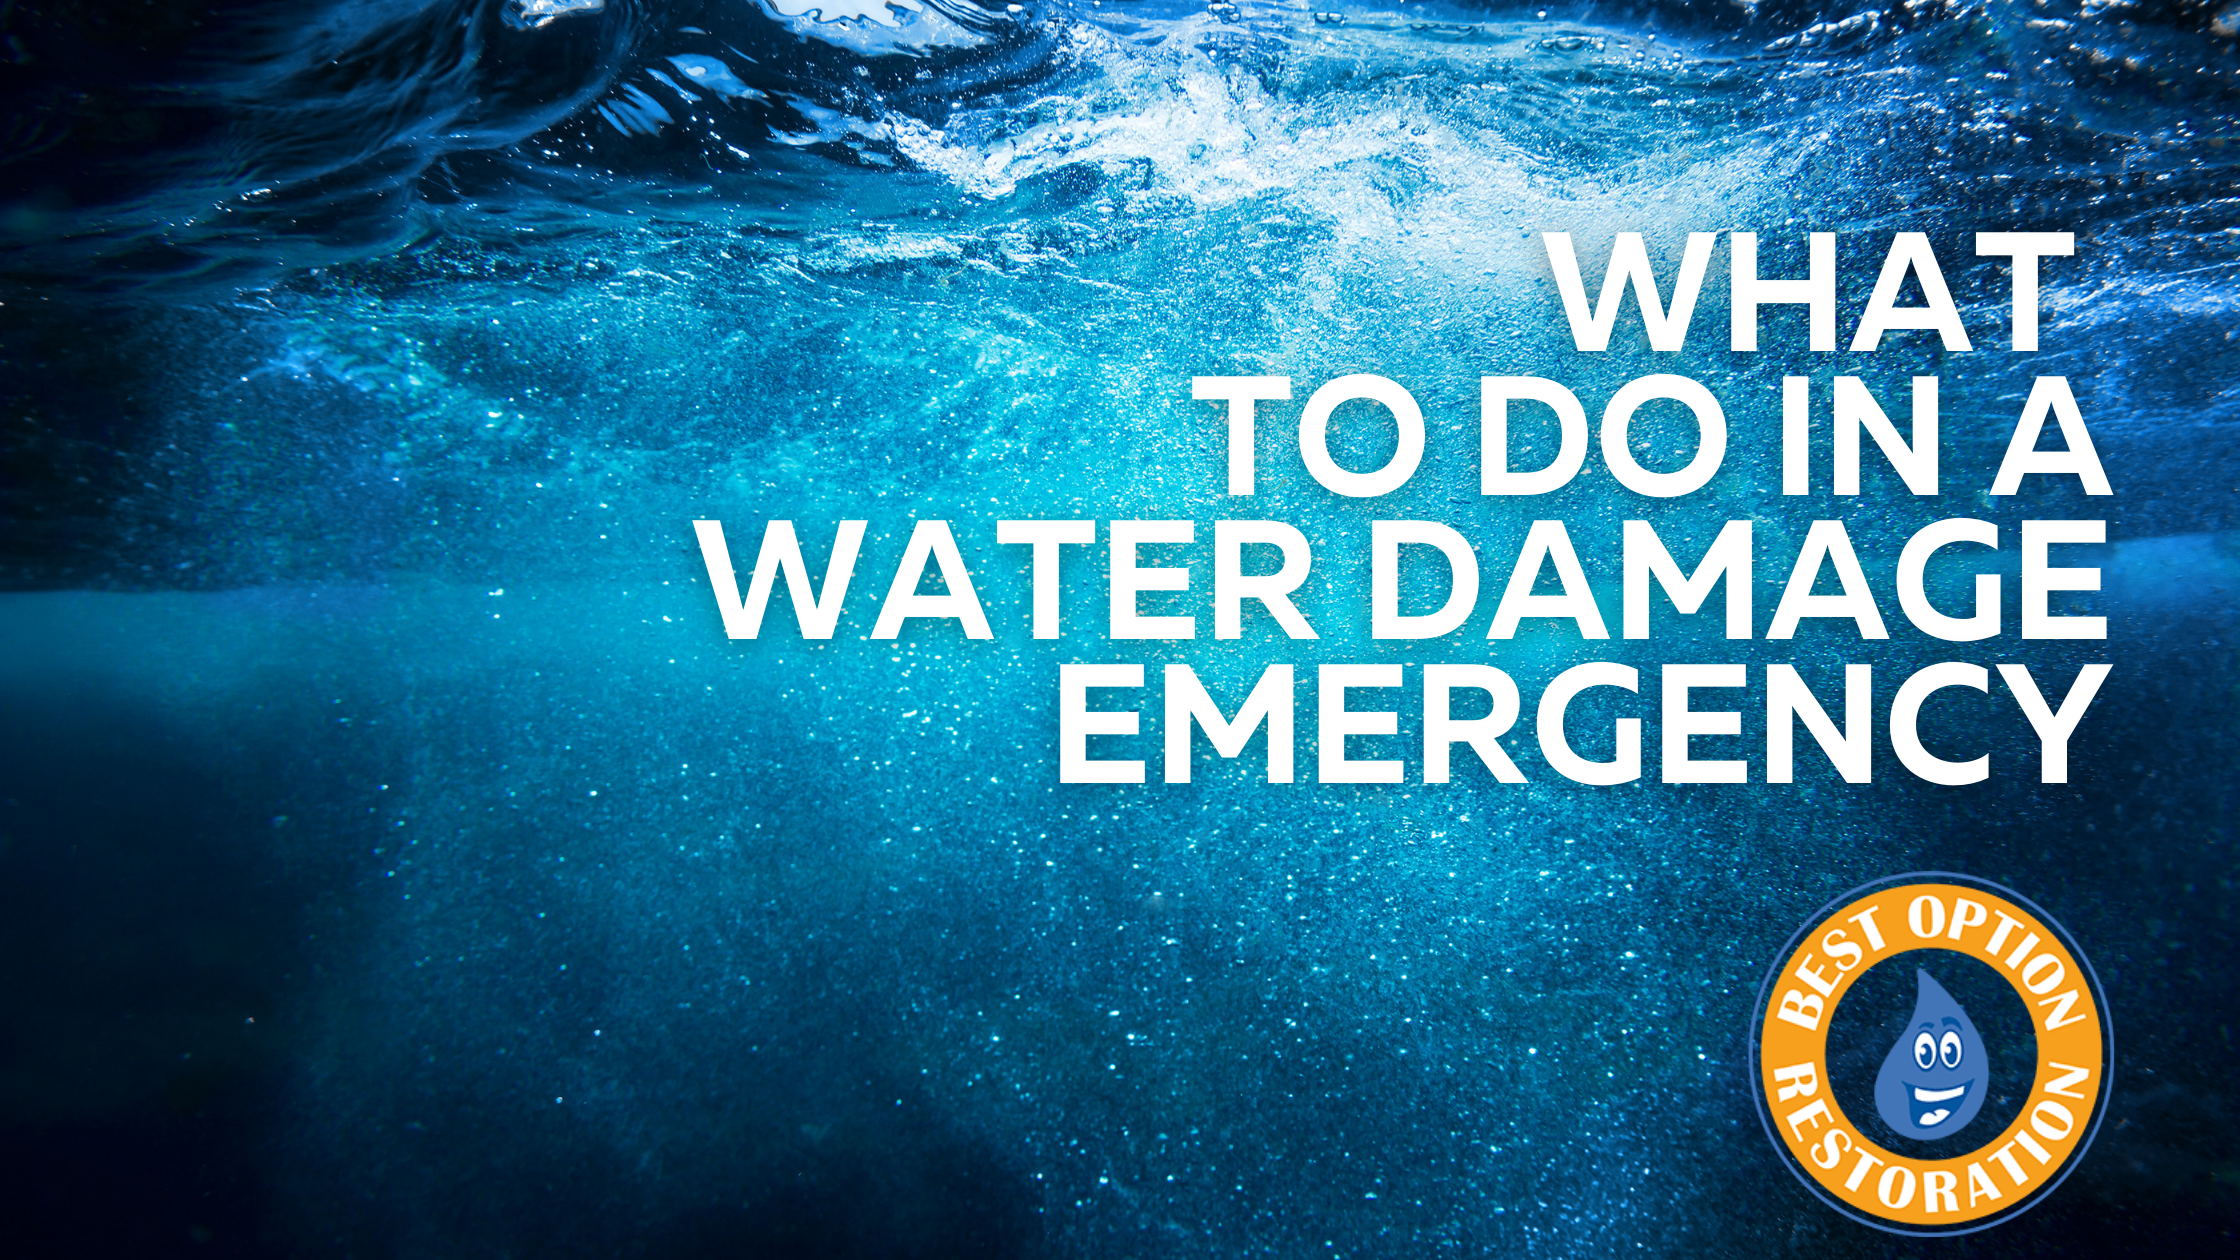 What to do in a water damage emergency